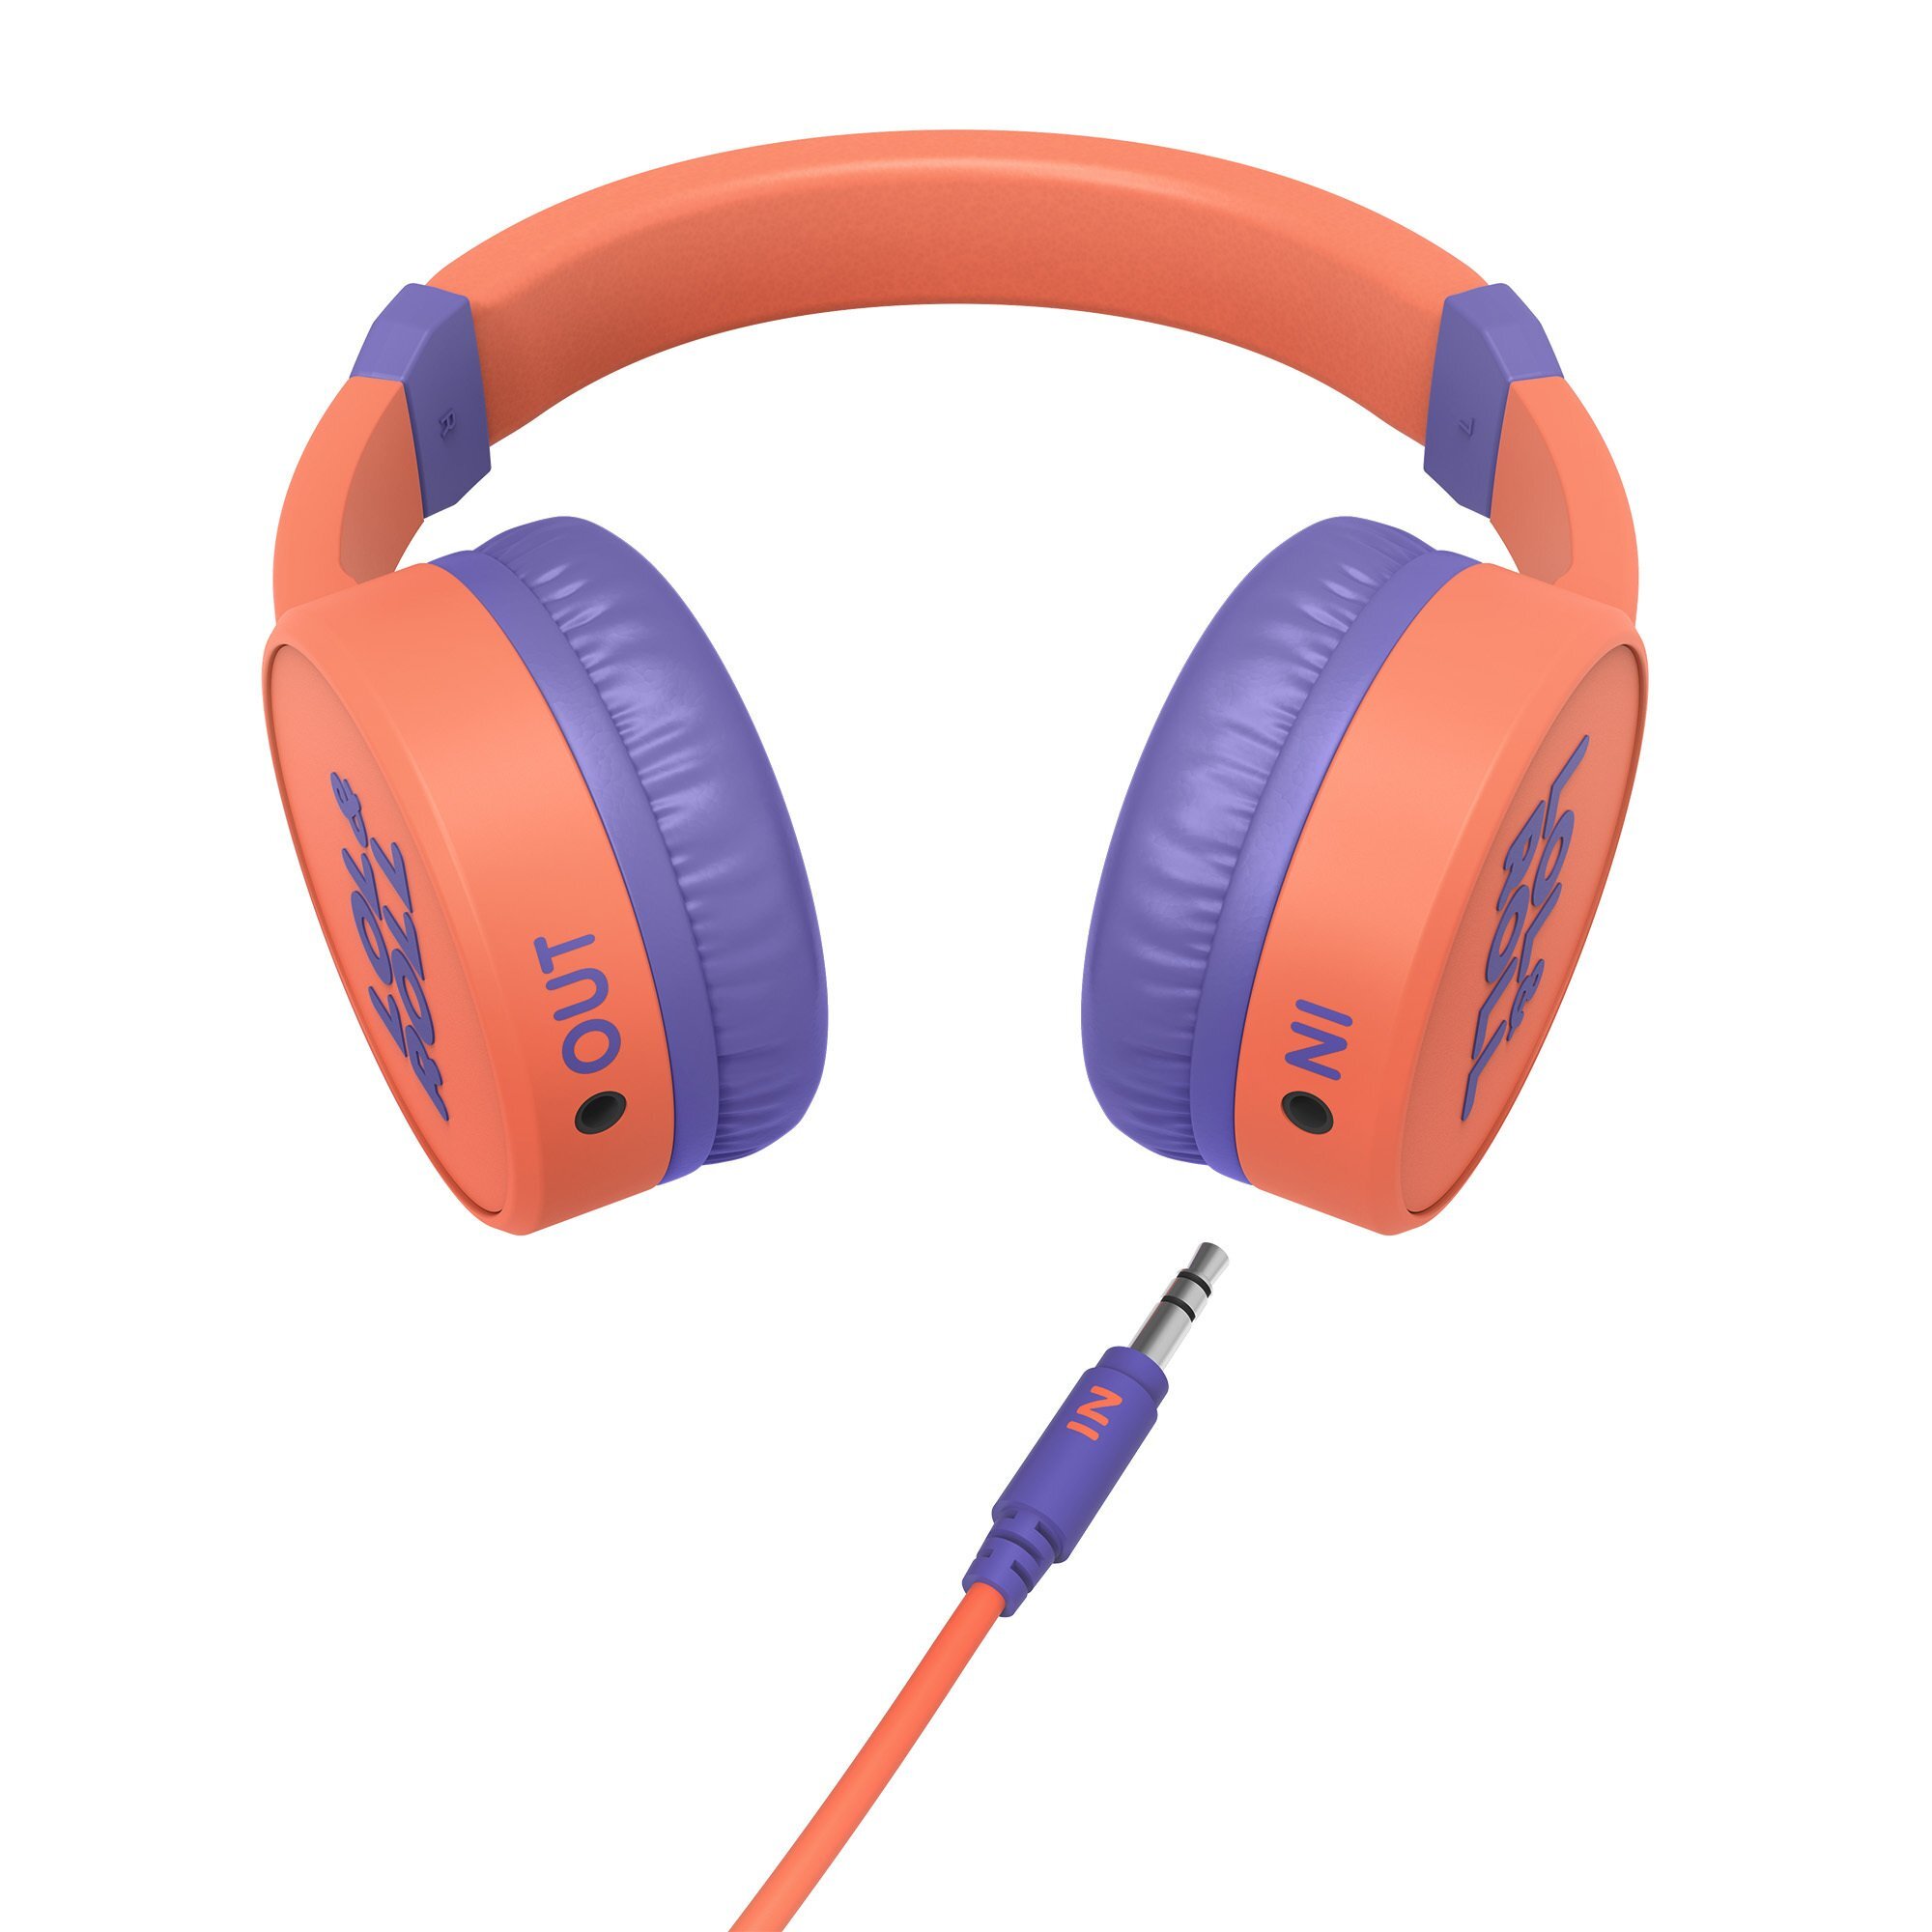 Kids headset with Music Share to pair 2 sets of headphones